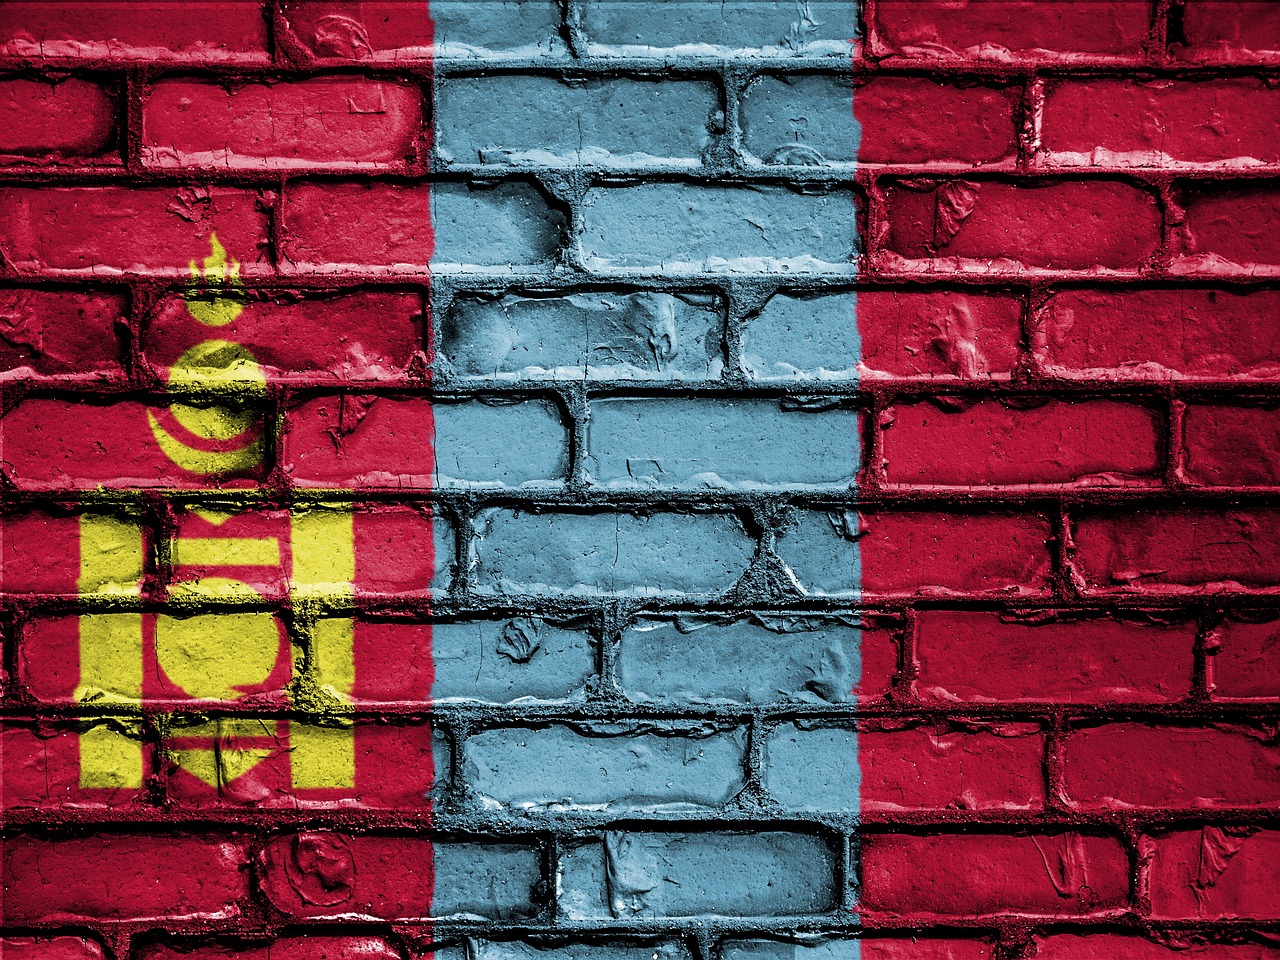 a brick wall with a flag painted on it, a digital rendering, by Stefan Gierowski, shutterstock, mongolia, red and teal color scheme, samoan features, belgium